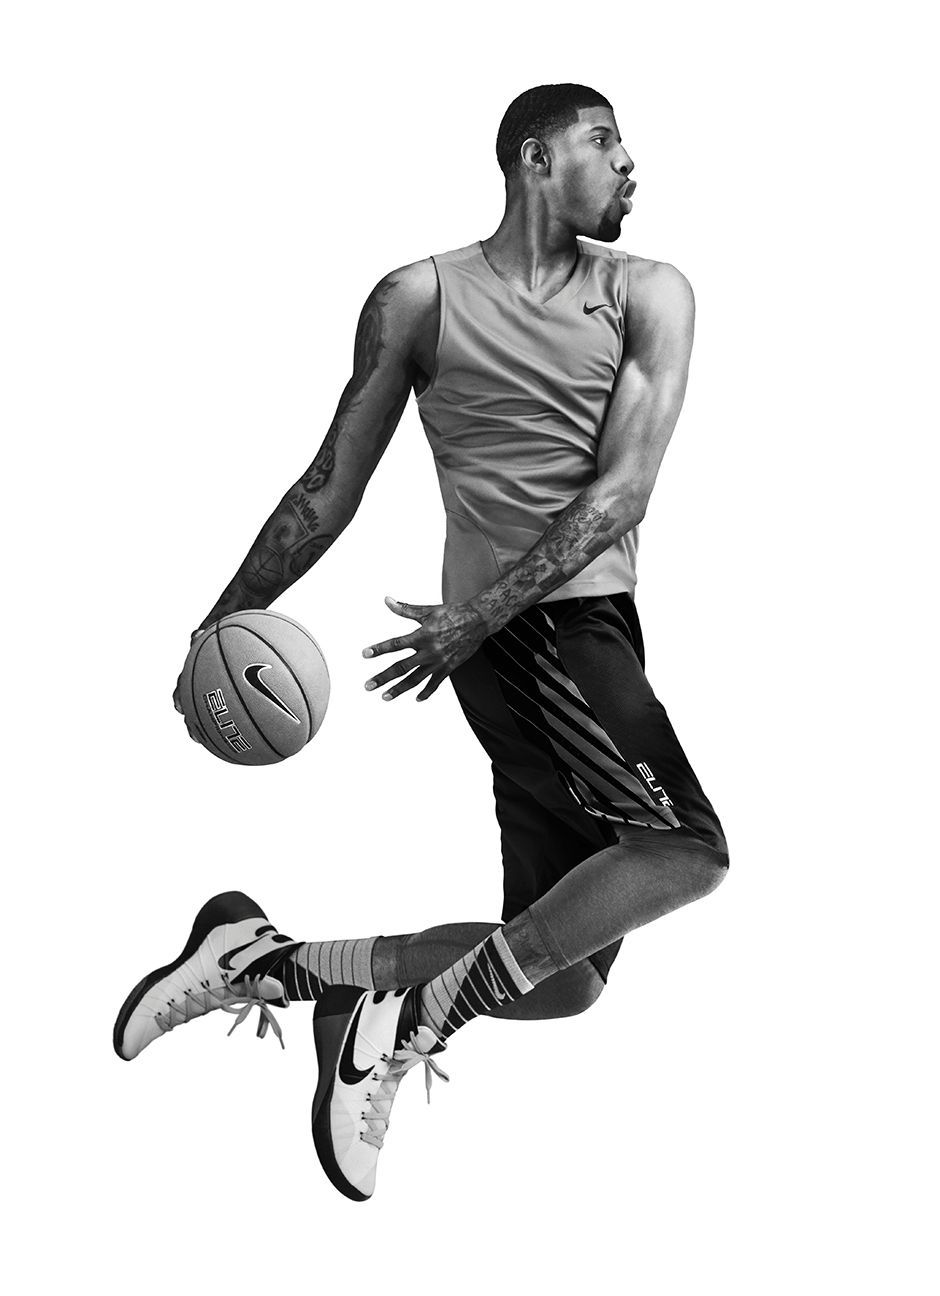 Paul George For The New Nike Hyperdunk My Style